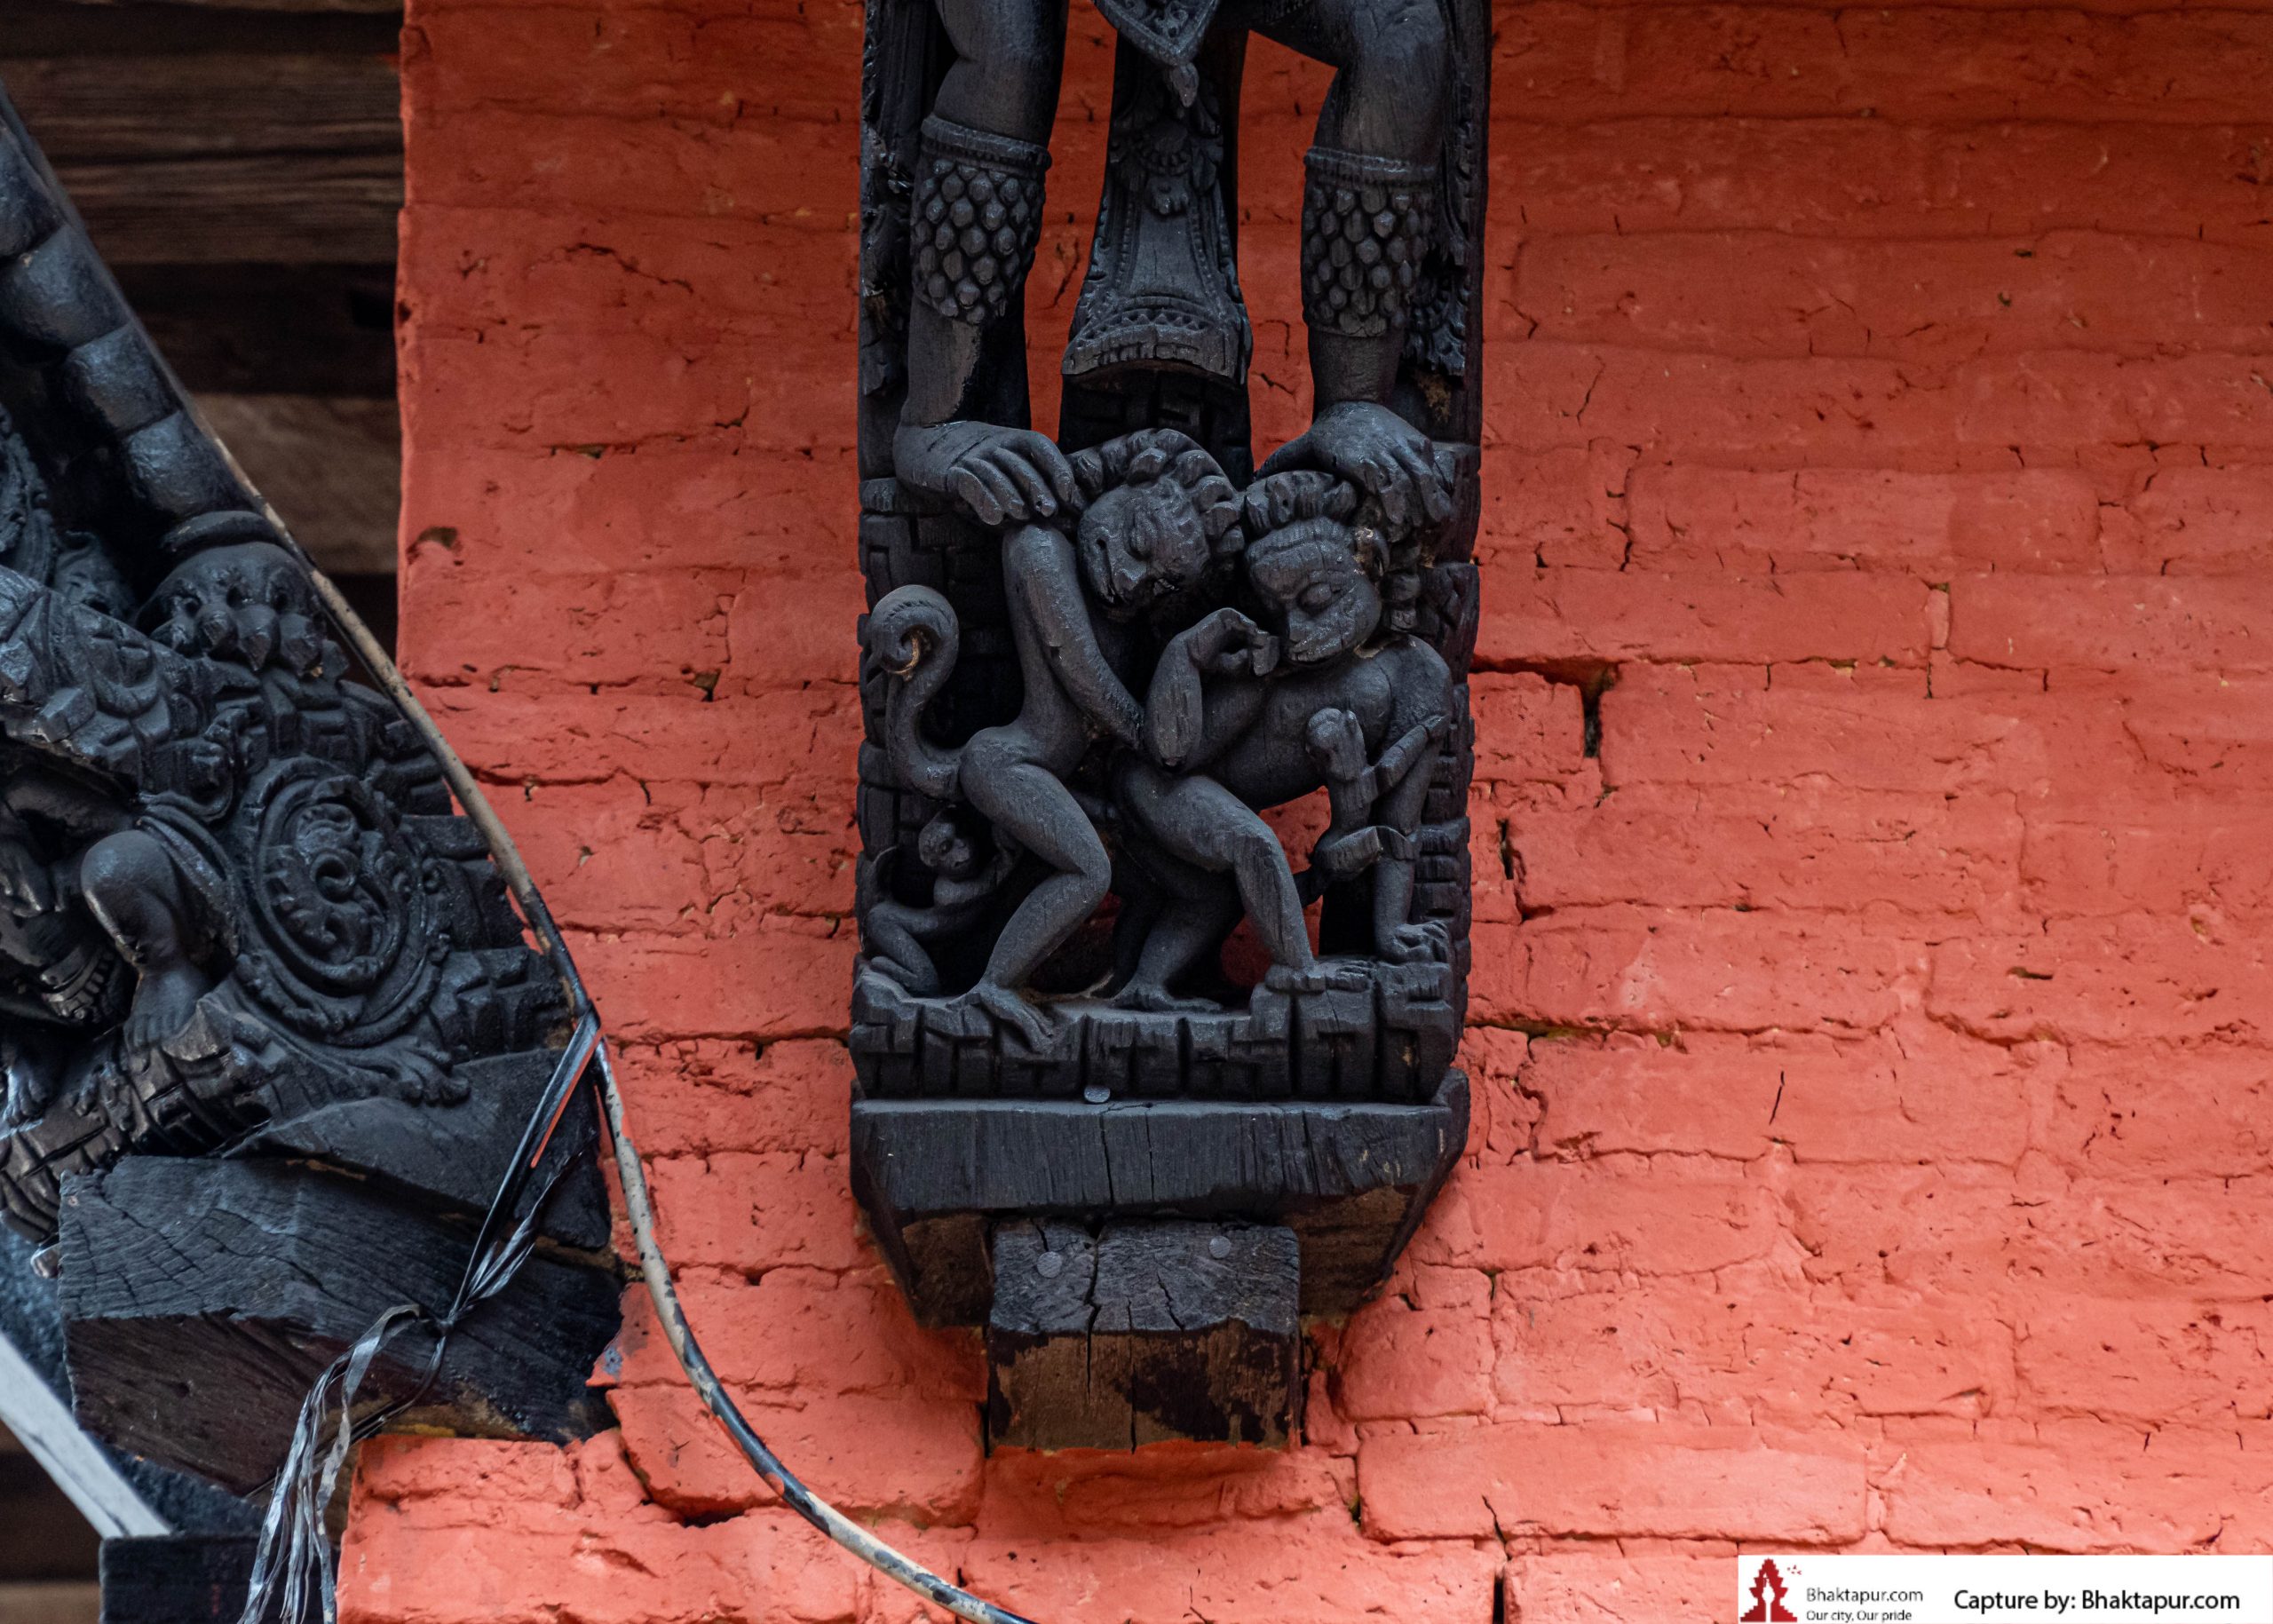 https://www.bhaktapur.com/wp-content/uploads/2021/08/erotic-carving-72-of-137-scaled.jpg